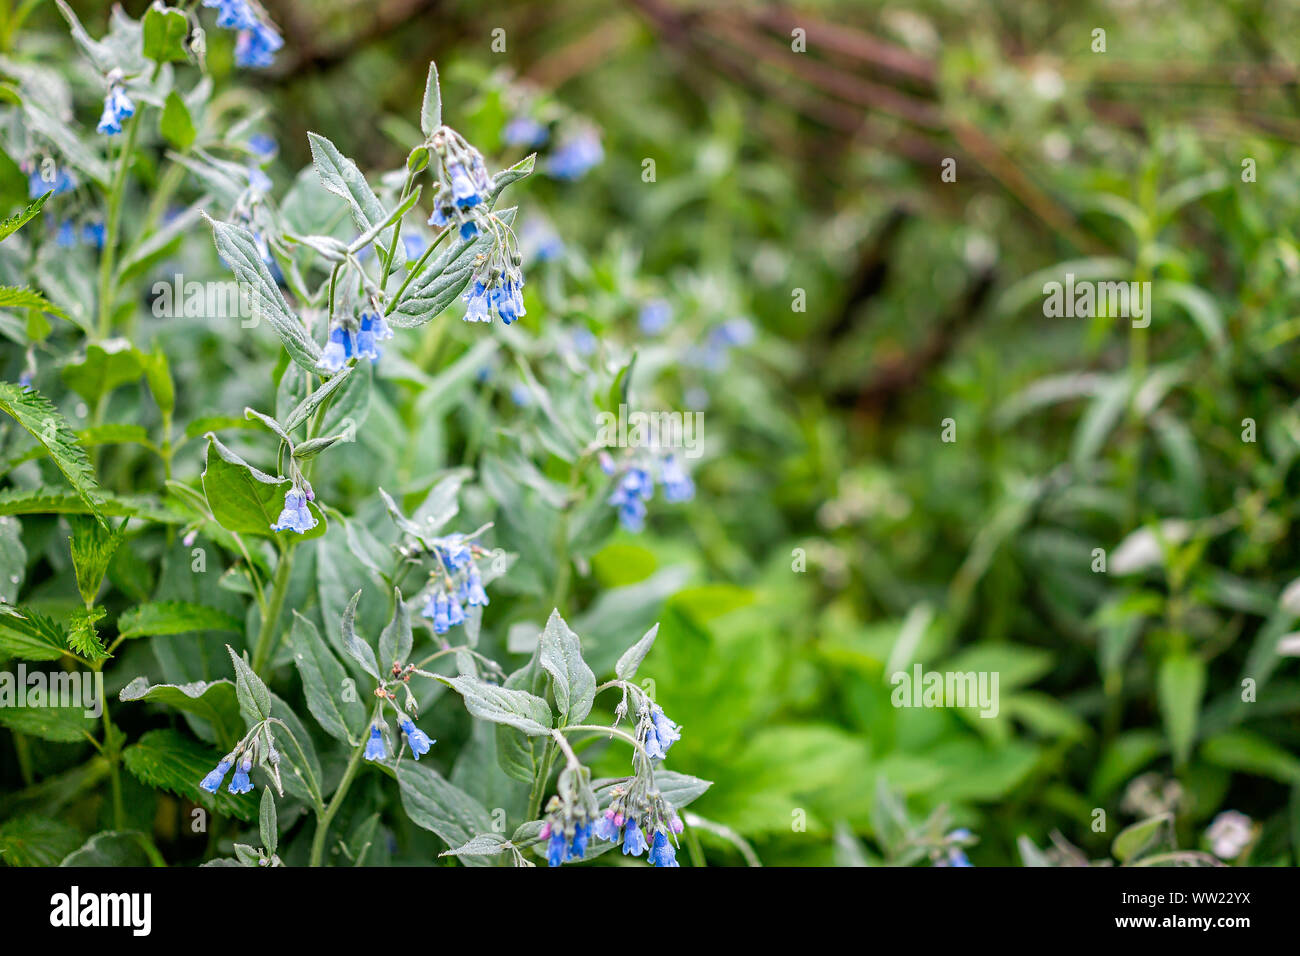 Closeup on blue bell bluebell flowers on Conundrum Creek Trail in Aspen, Colorado in 2019 summer with water drops Stock Photo